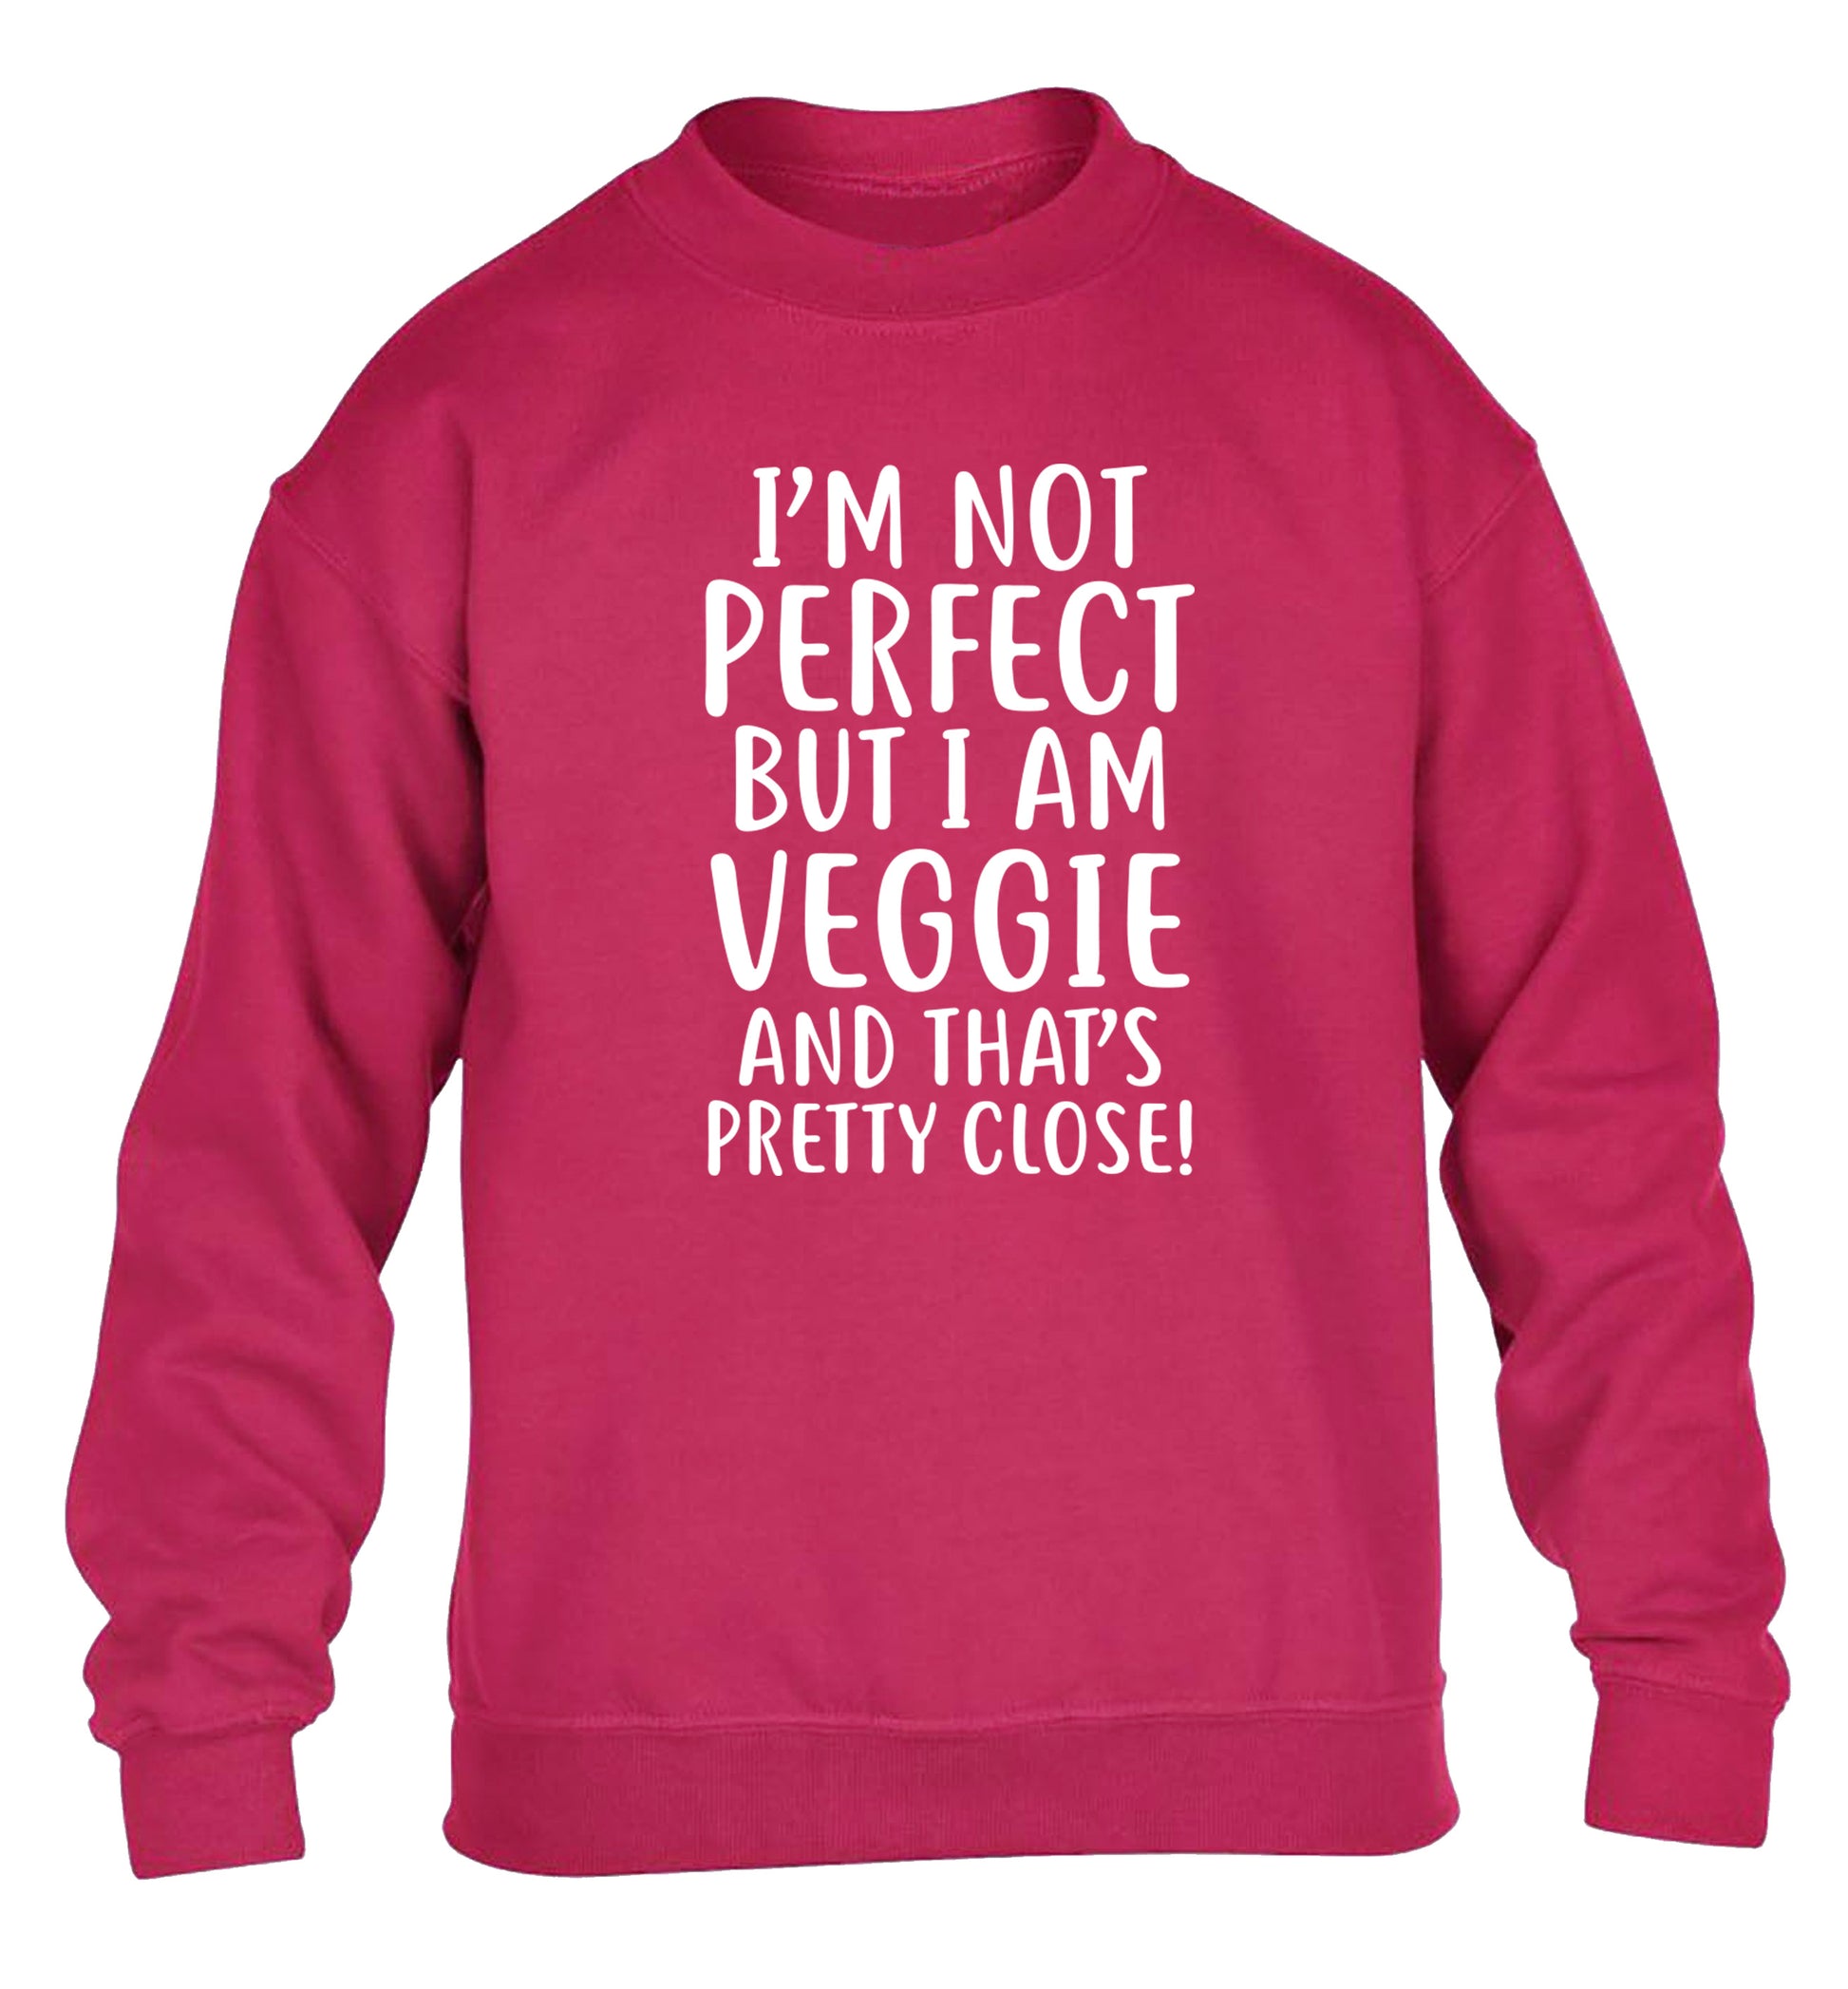 Might not be perfect but I am veggie children's pink sweater 12-13 Years